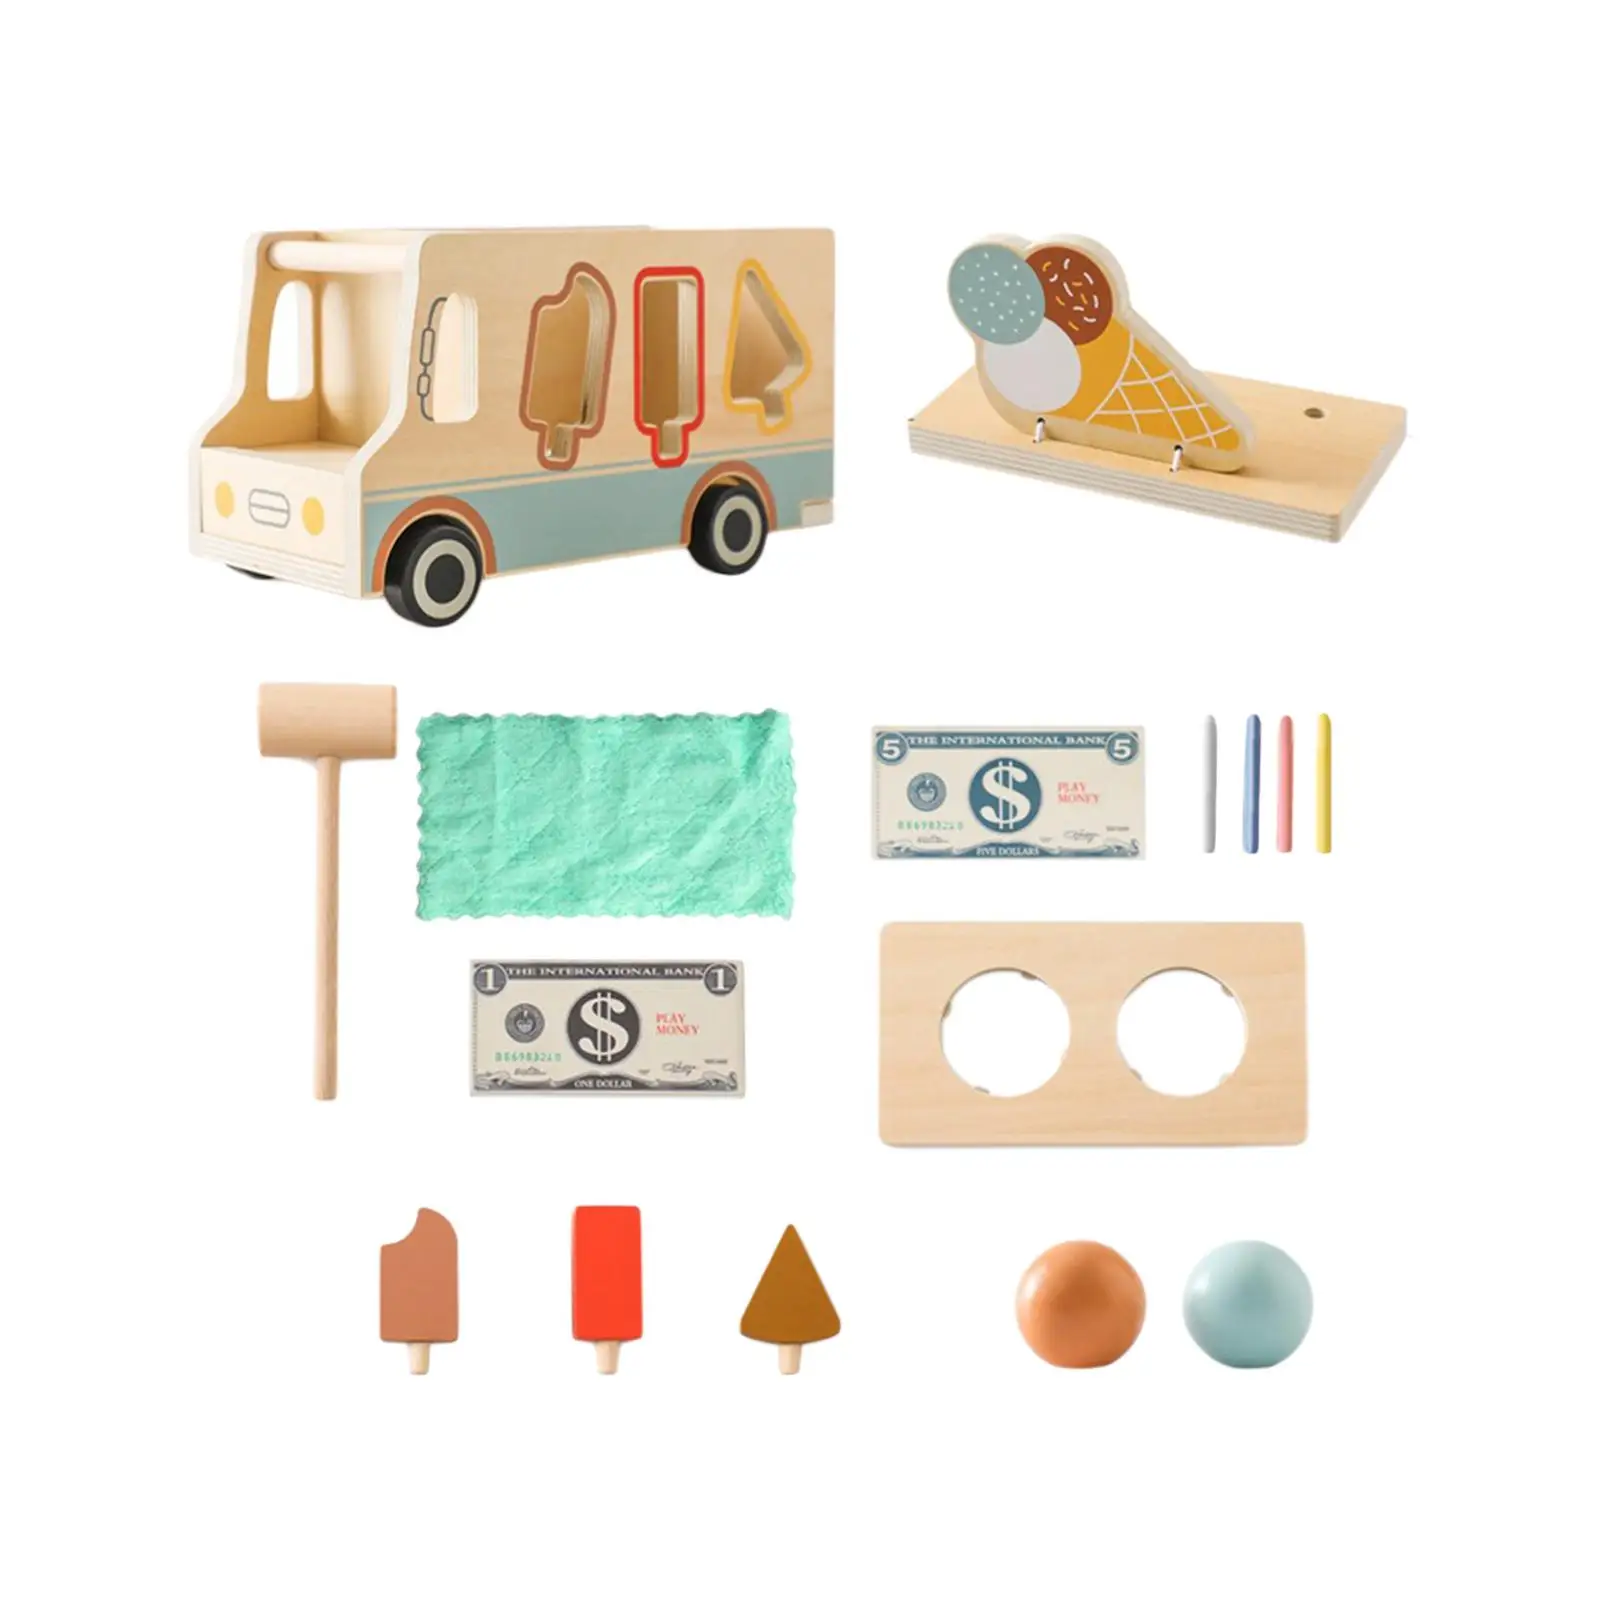 Wooden Ice Cream Toy Shop Montessori Role Play Toys Playset Kitchen Accessories for Toddlers Children 3 Year Old Girls Boys